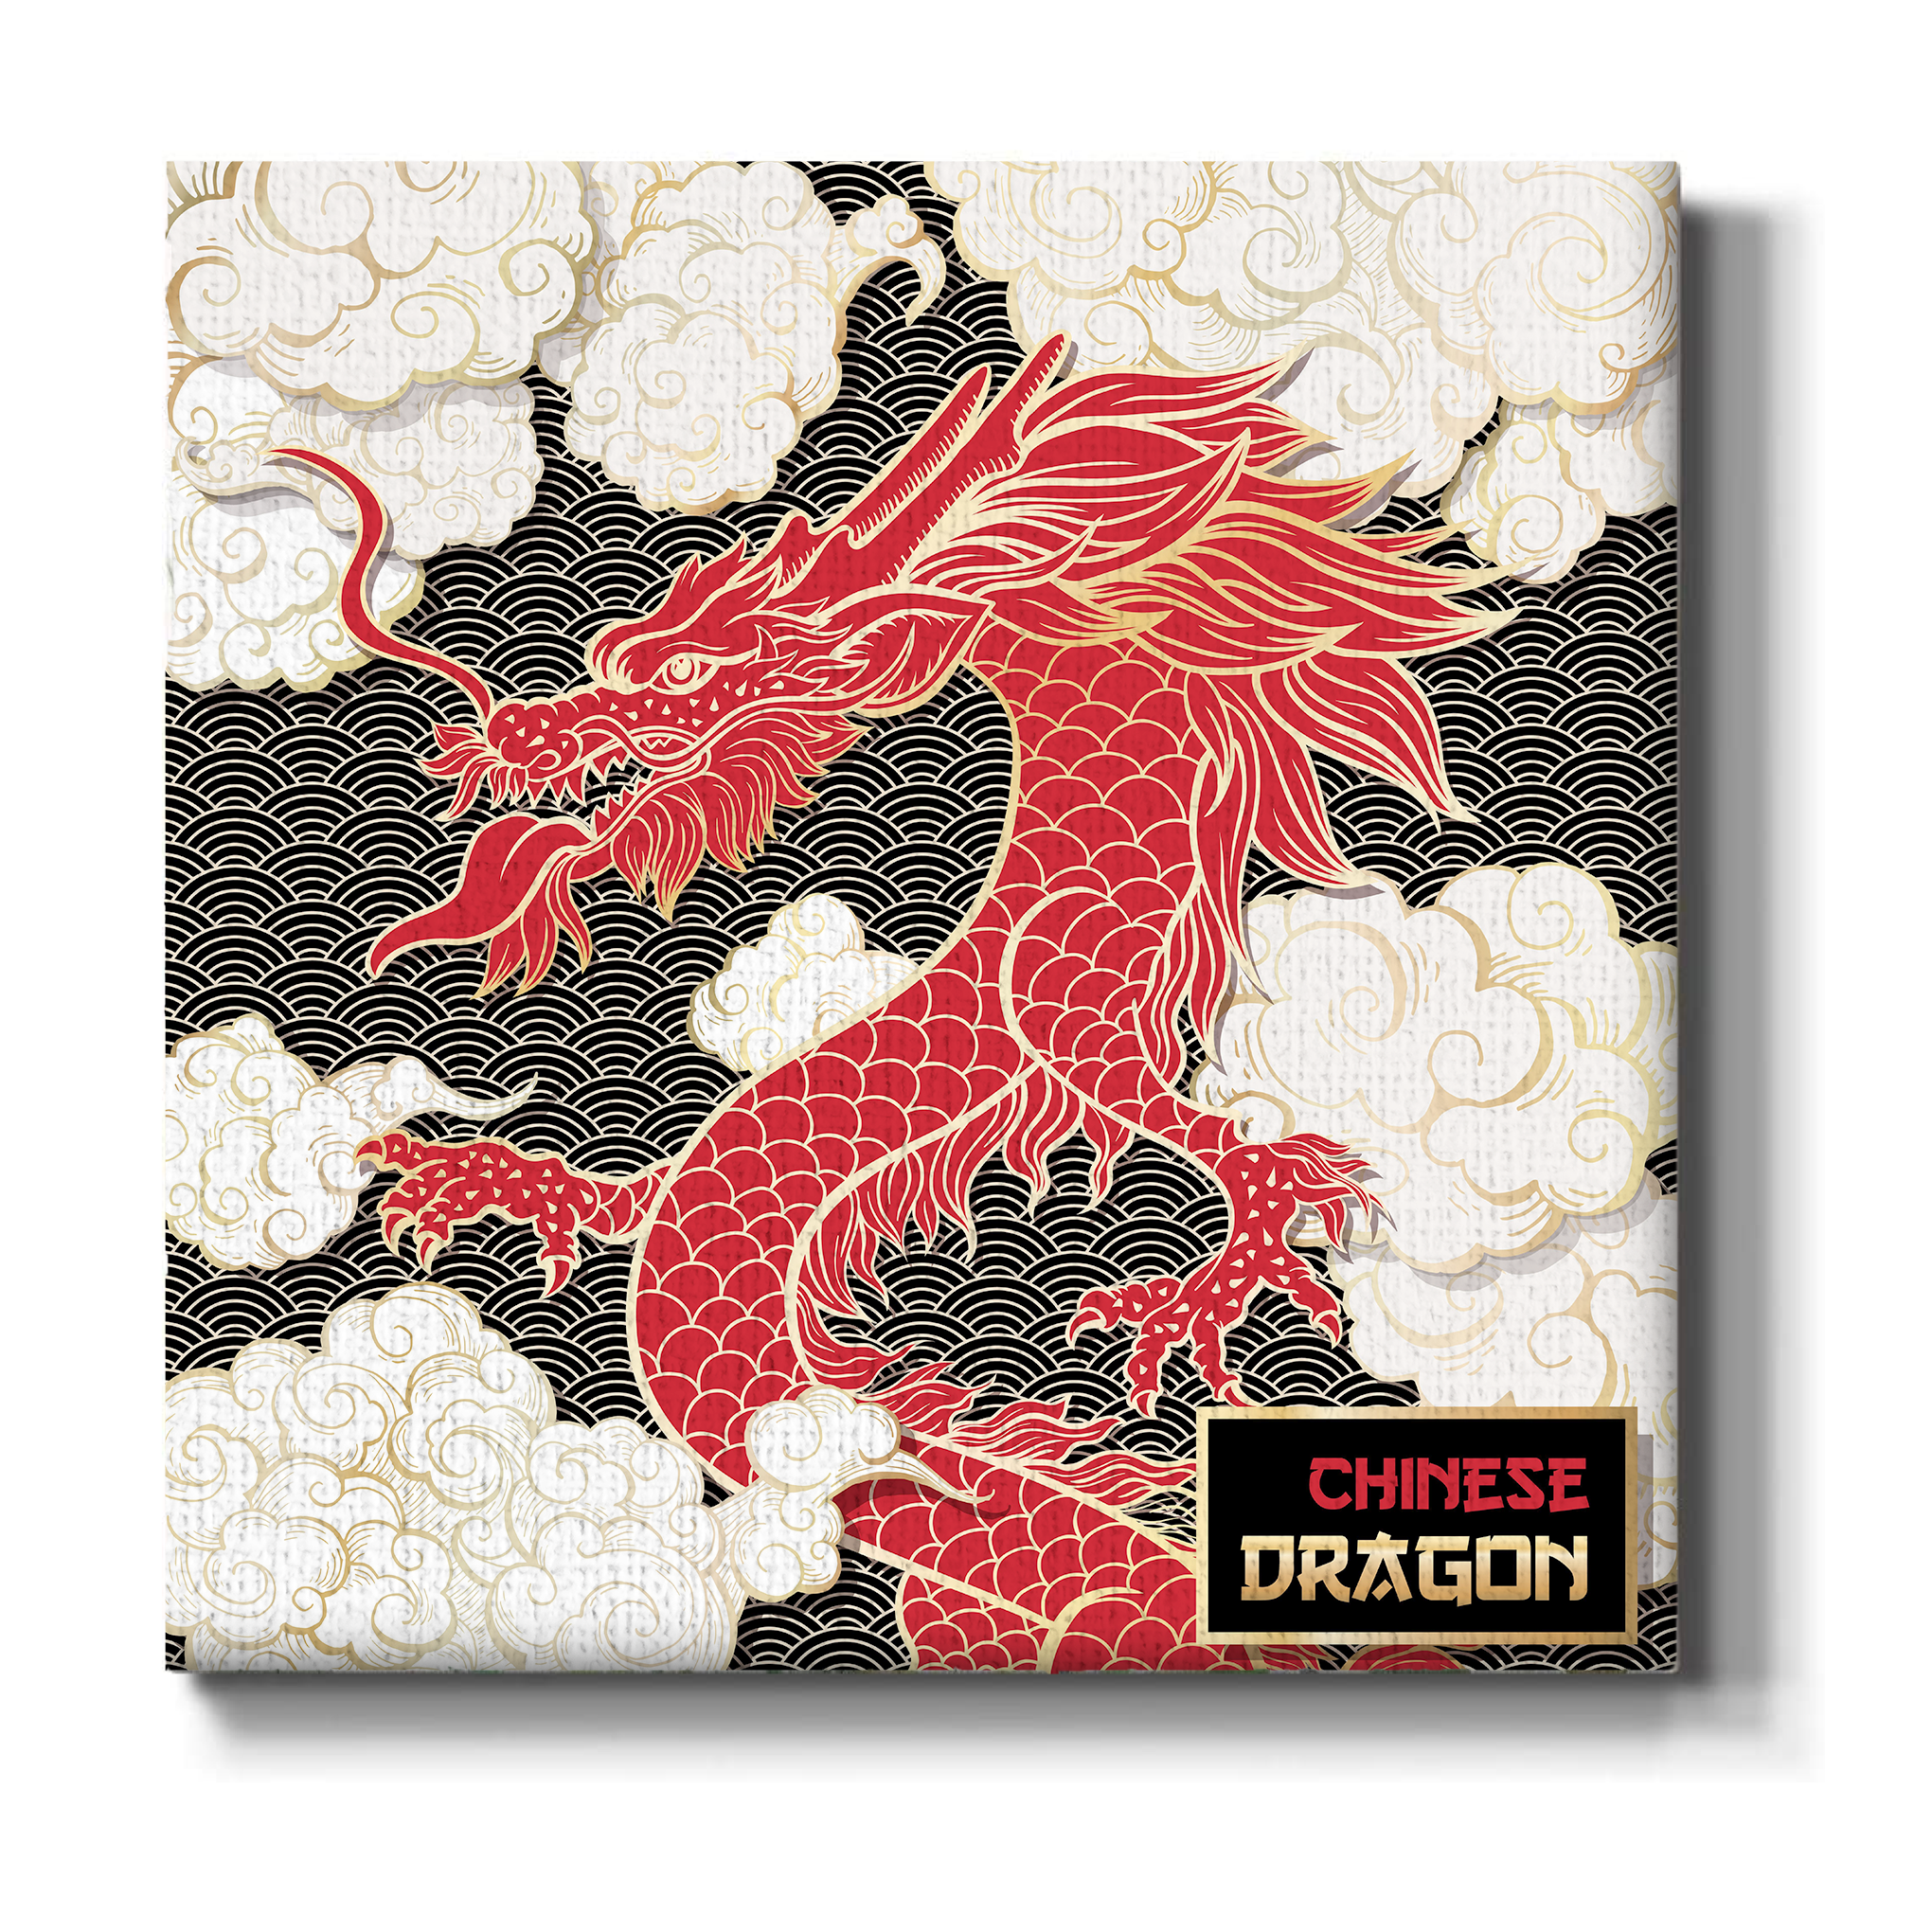 Chinese Dragon Wall Canvas 1 Piece